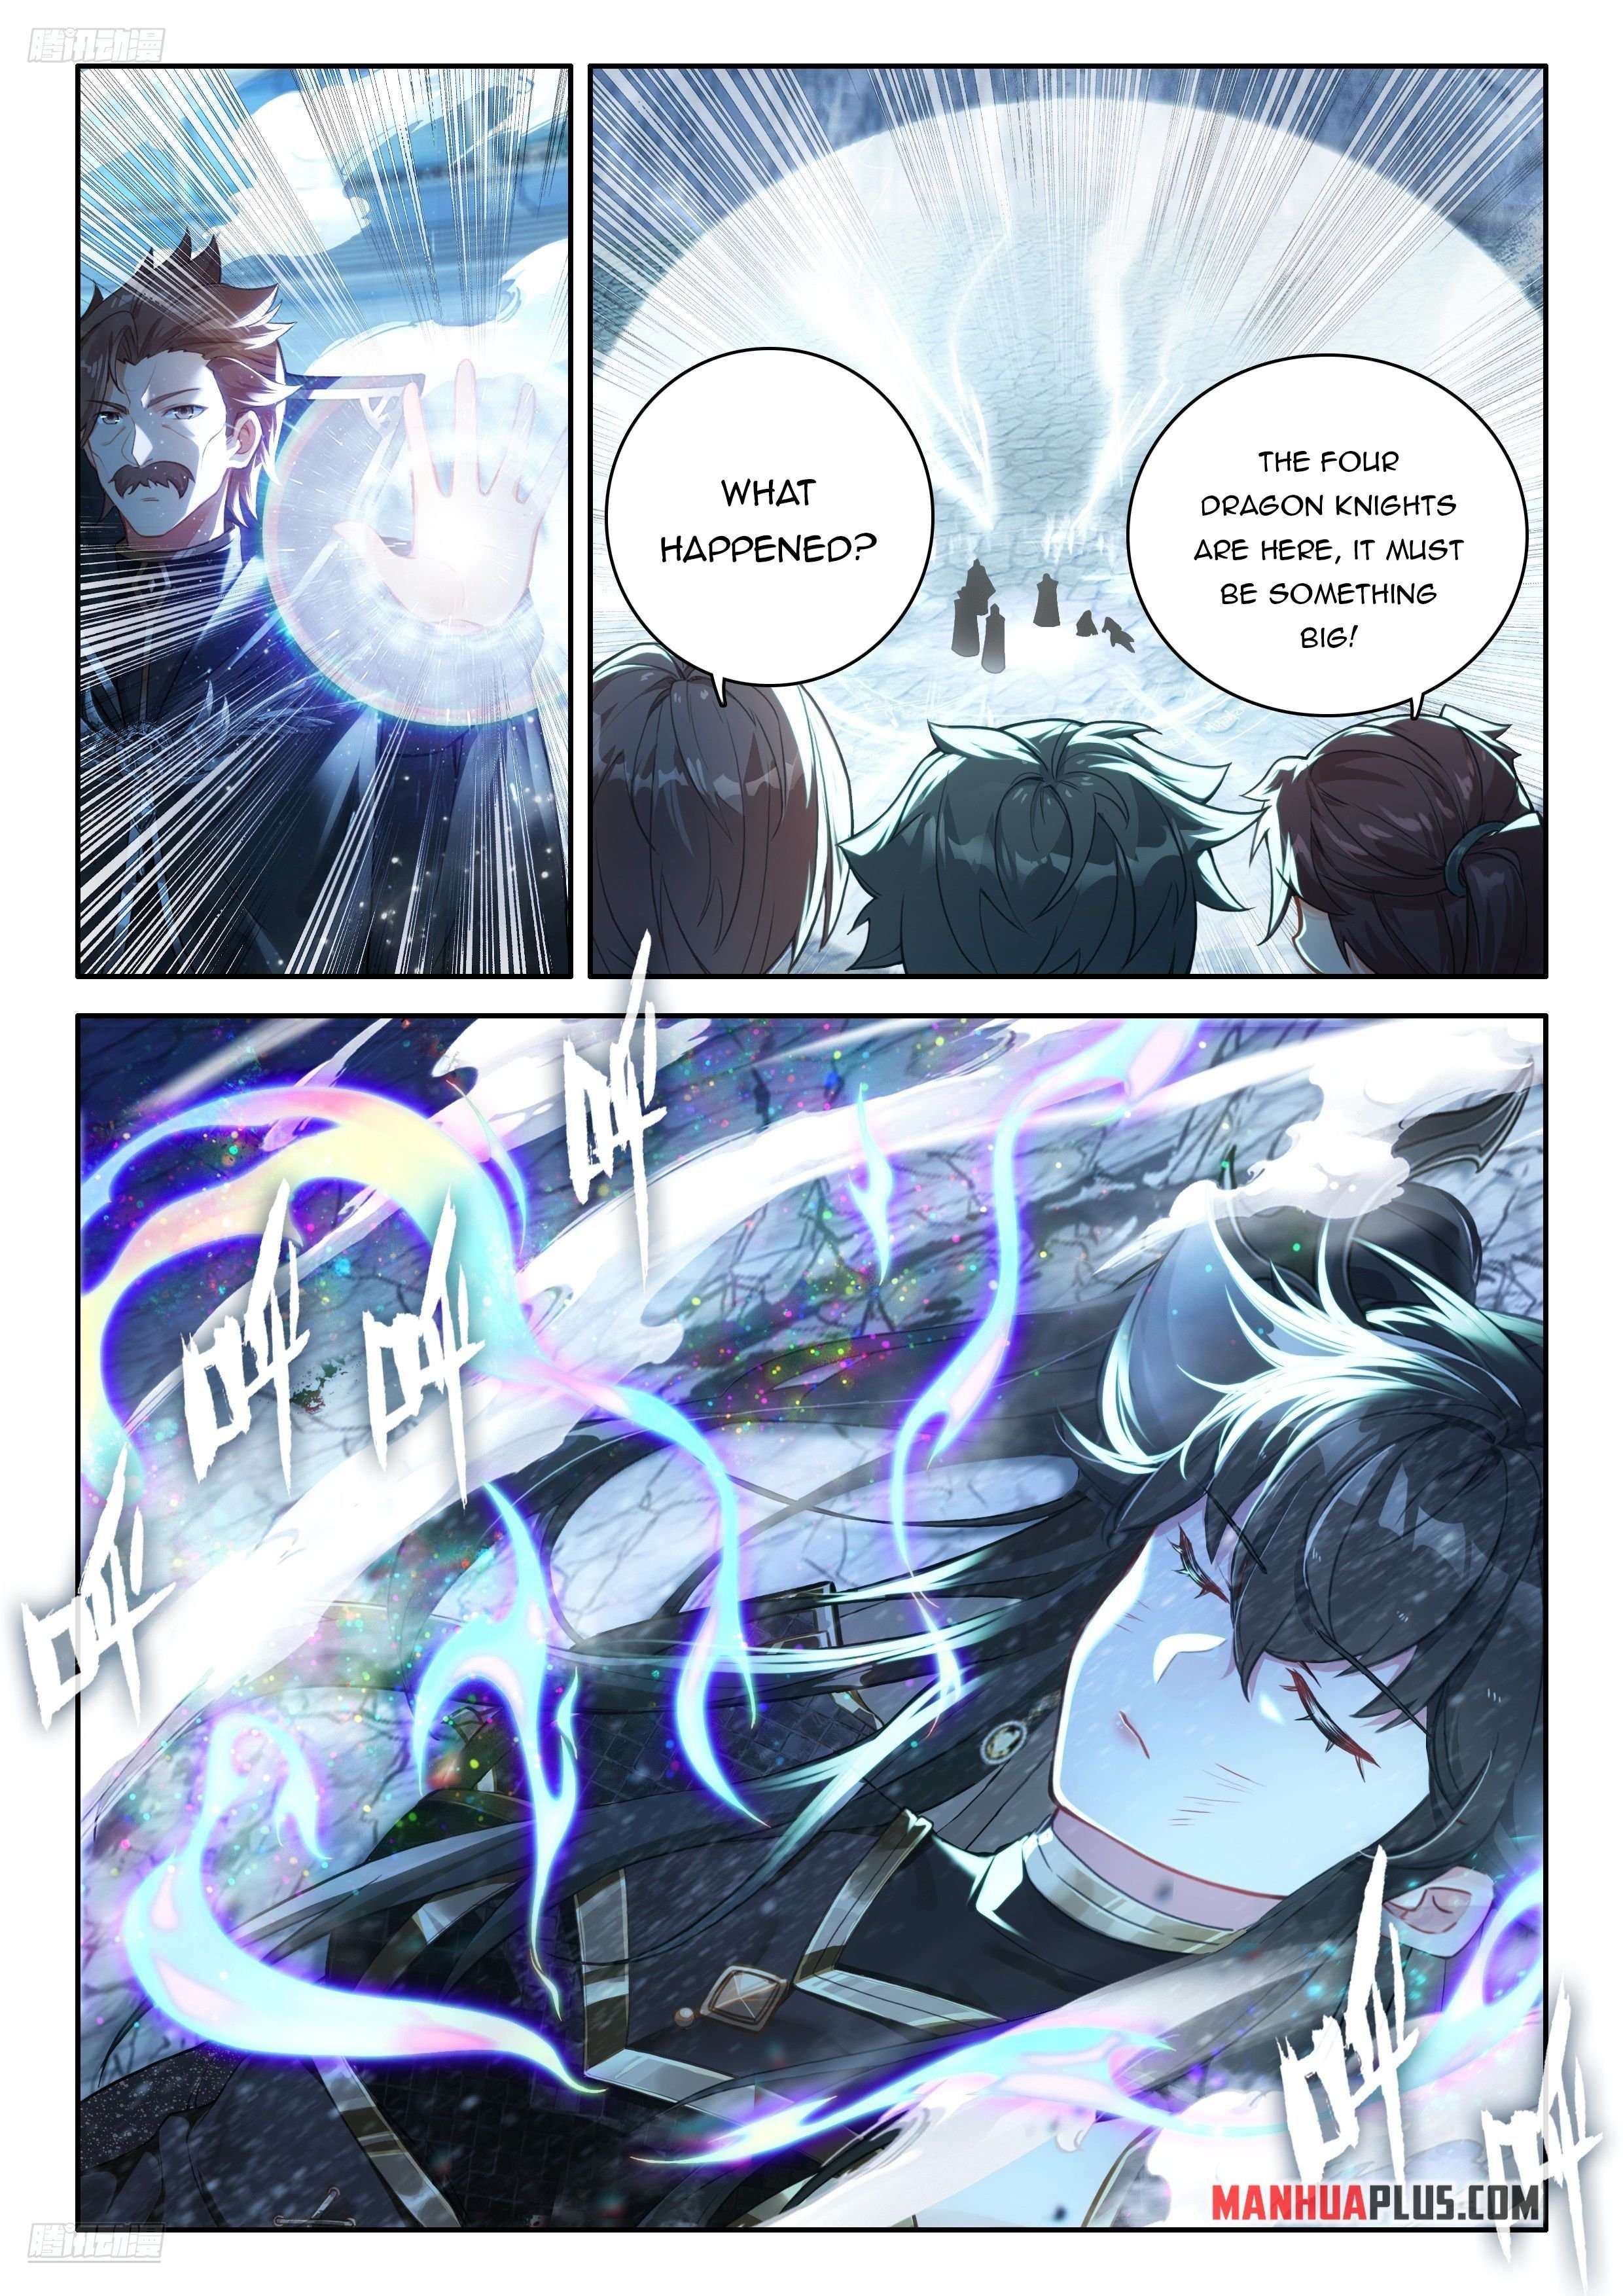 Soul Land IV - The Ultimate Combat - chapter 476.5 - #2